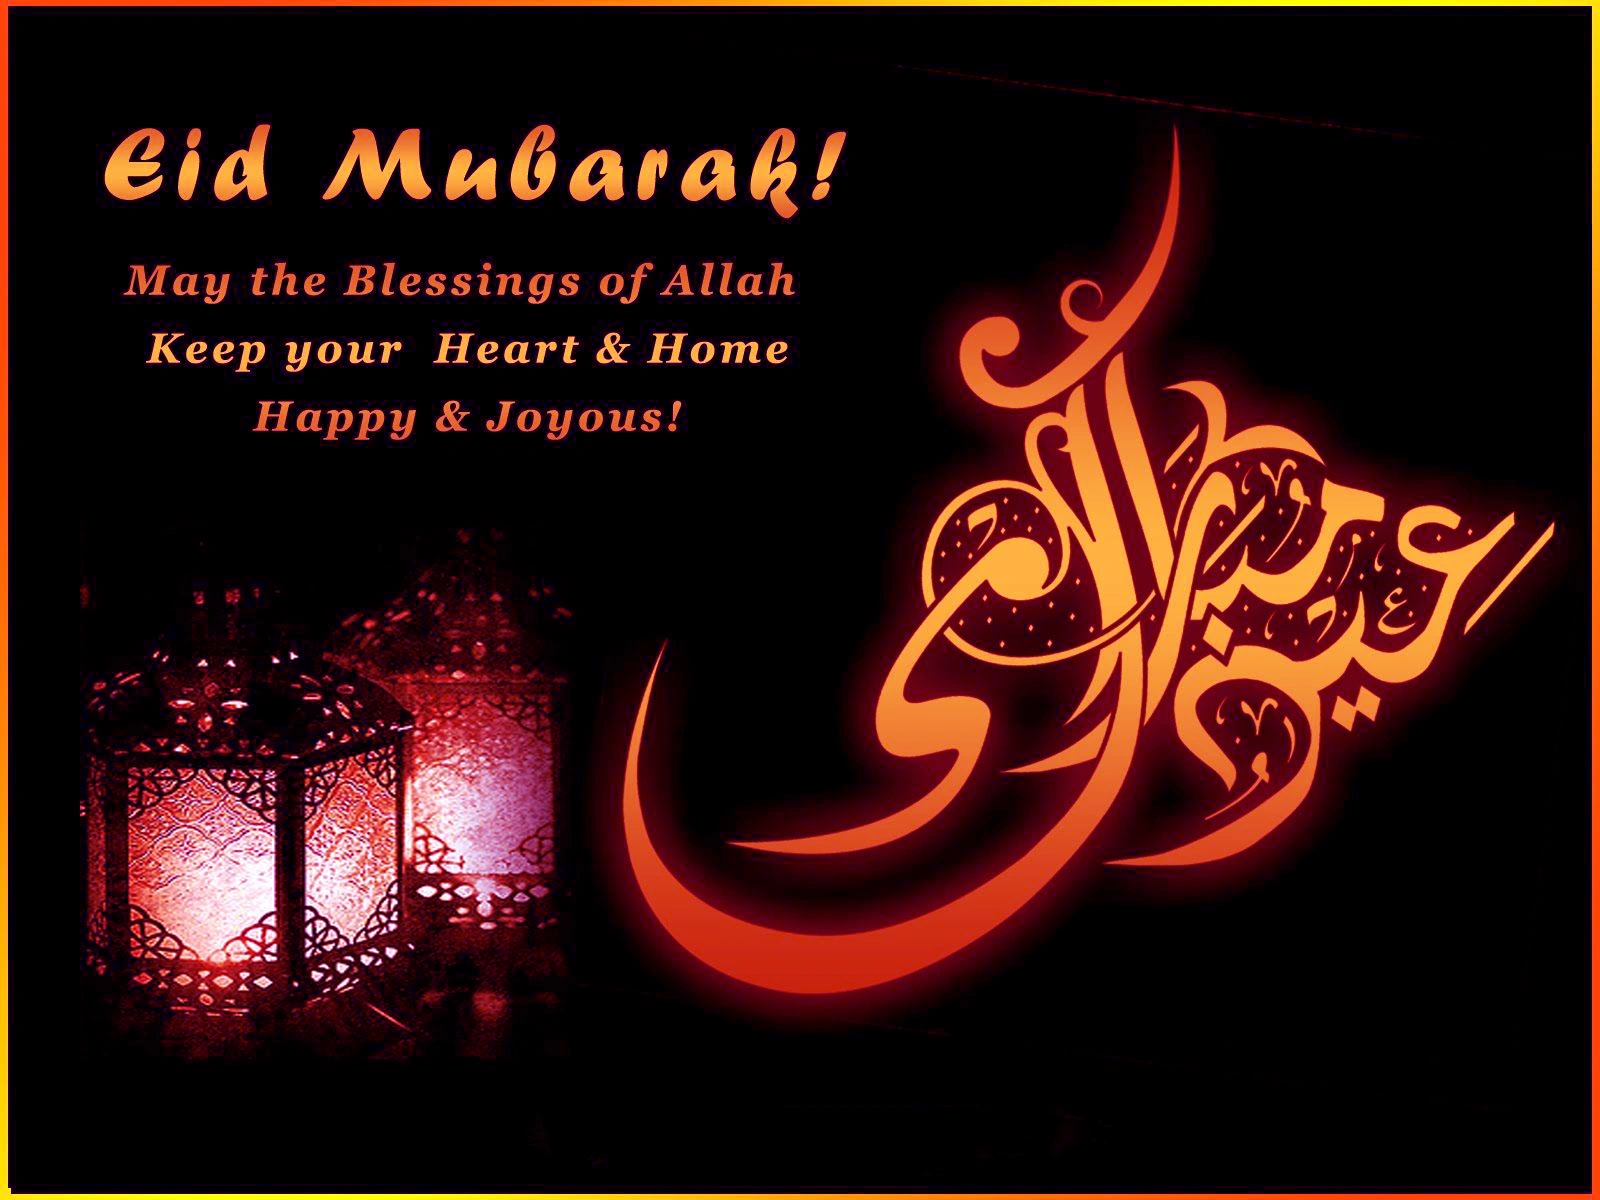 Eid Mubarak May the blessings of Allah keep your heart and home happy and joyous